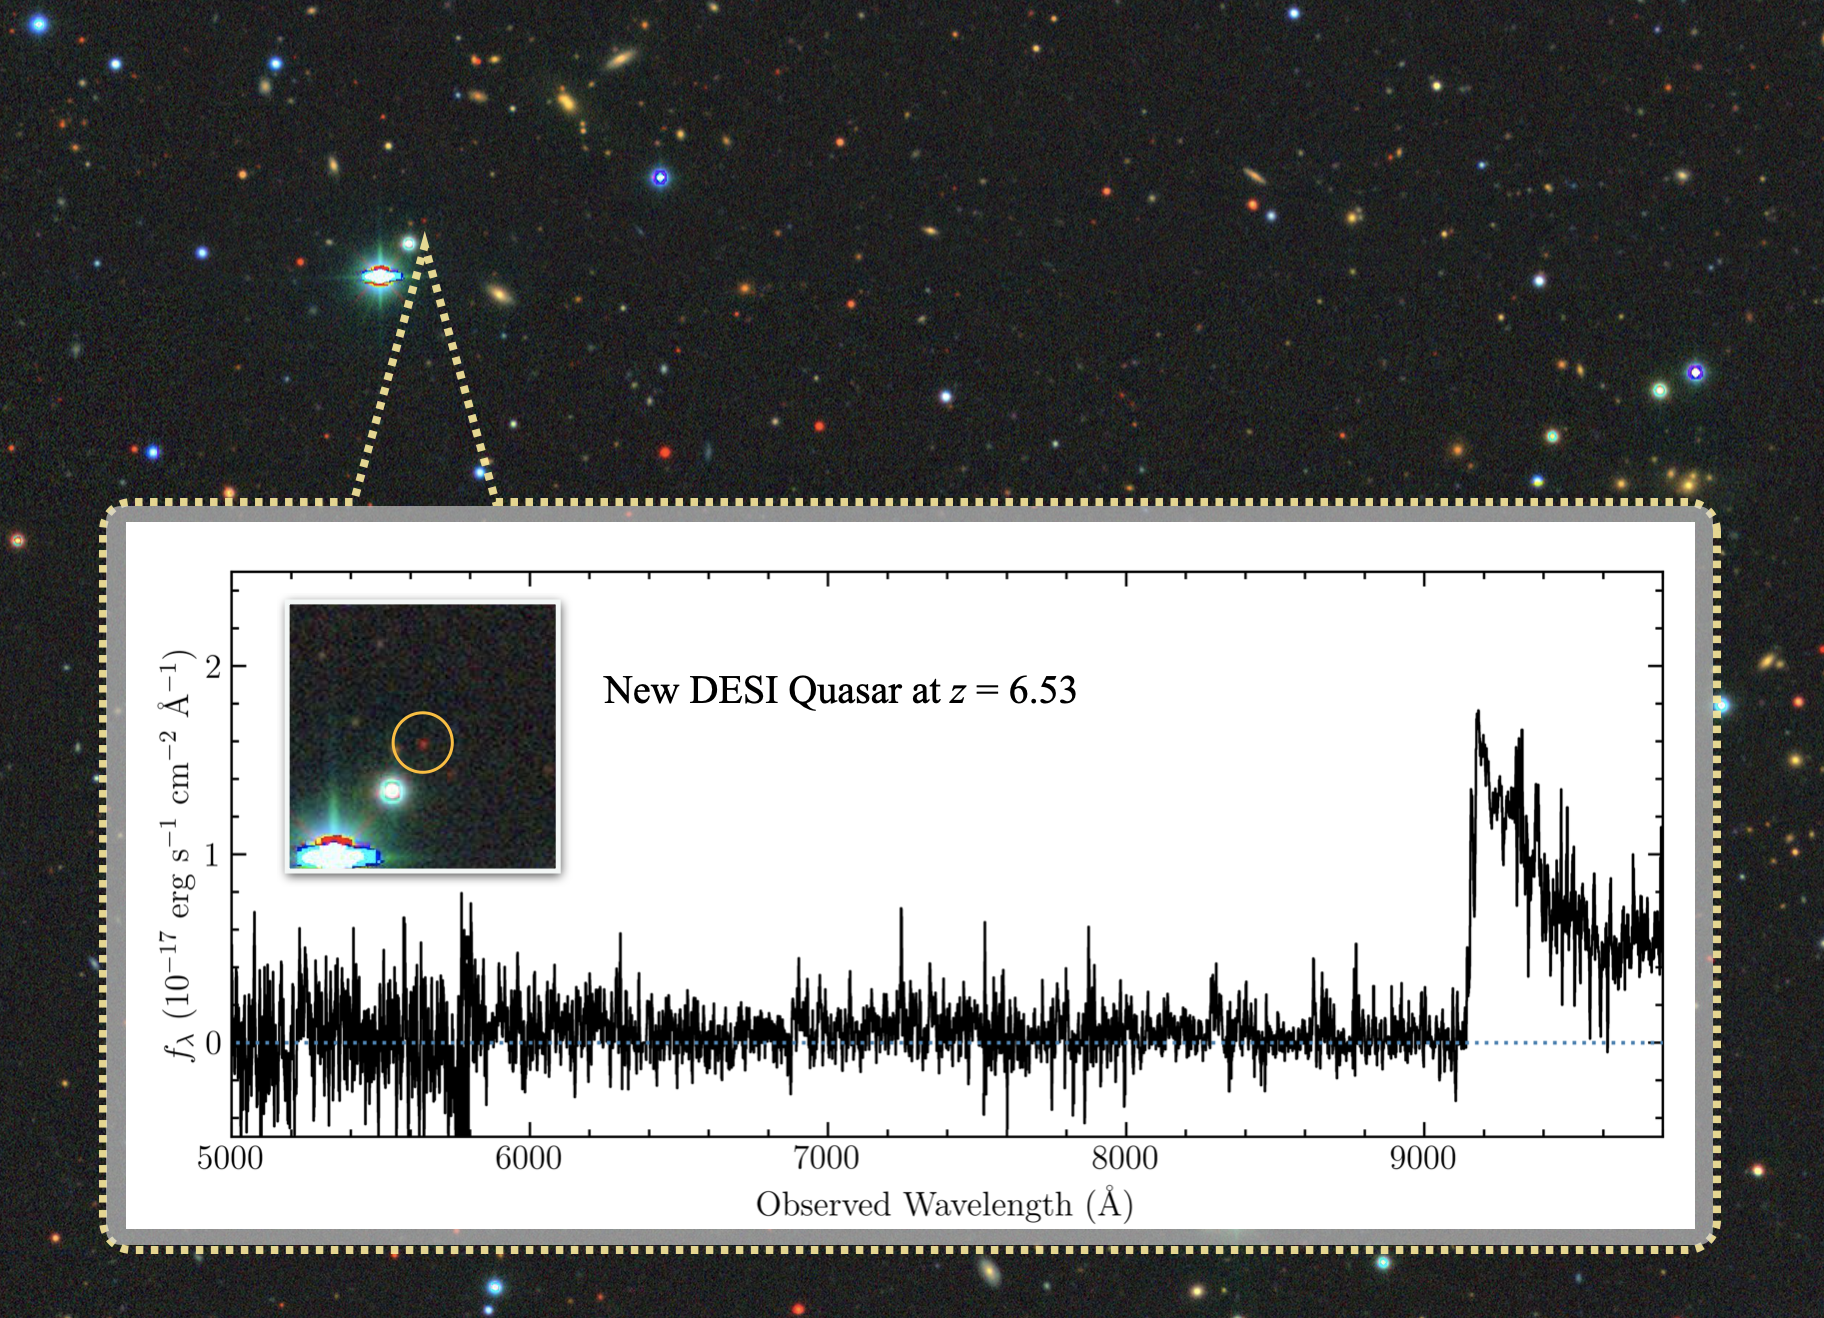 A new quasar discovered using DESI gives a glimpse of the universe as it was nearly 13 billion years ago, less than a billion years after the Big Bang. This is the most distant quasar discovered with DESI to date, from a DESI very high-redshift quasar selection. The background shows this quasar and its surroundings in the DESI Legacy imaging surveys.